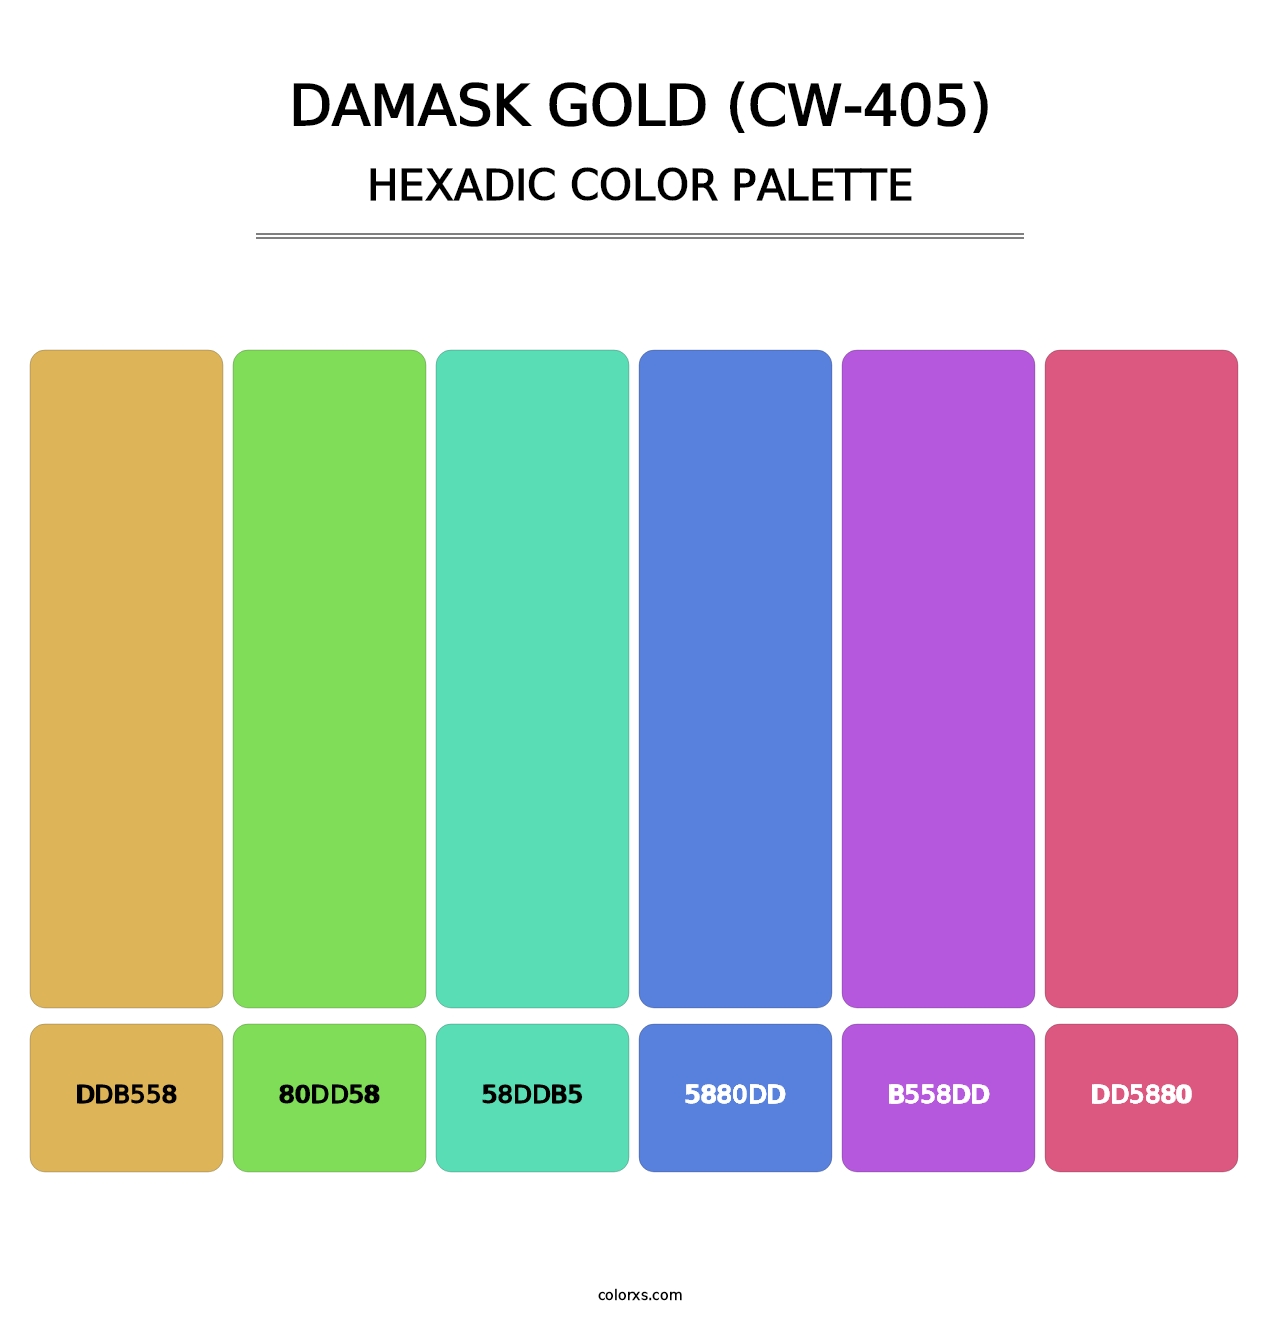 Damask Gold (CW-405) - Hexadic Color Palette